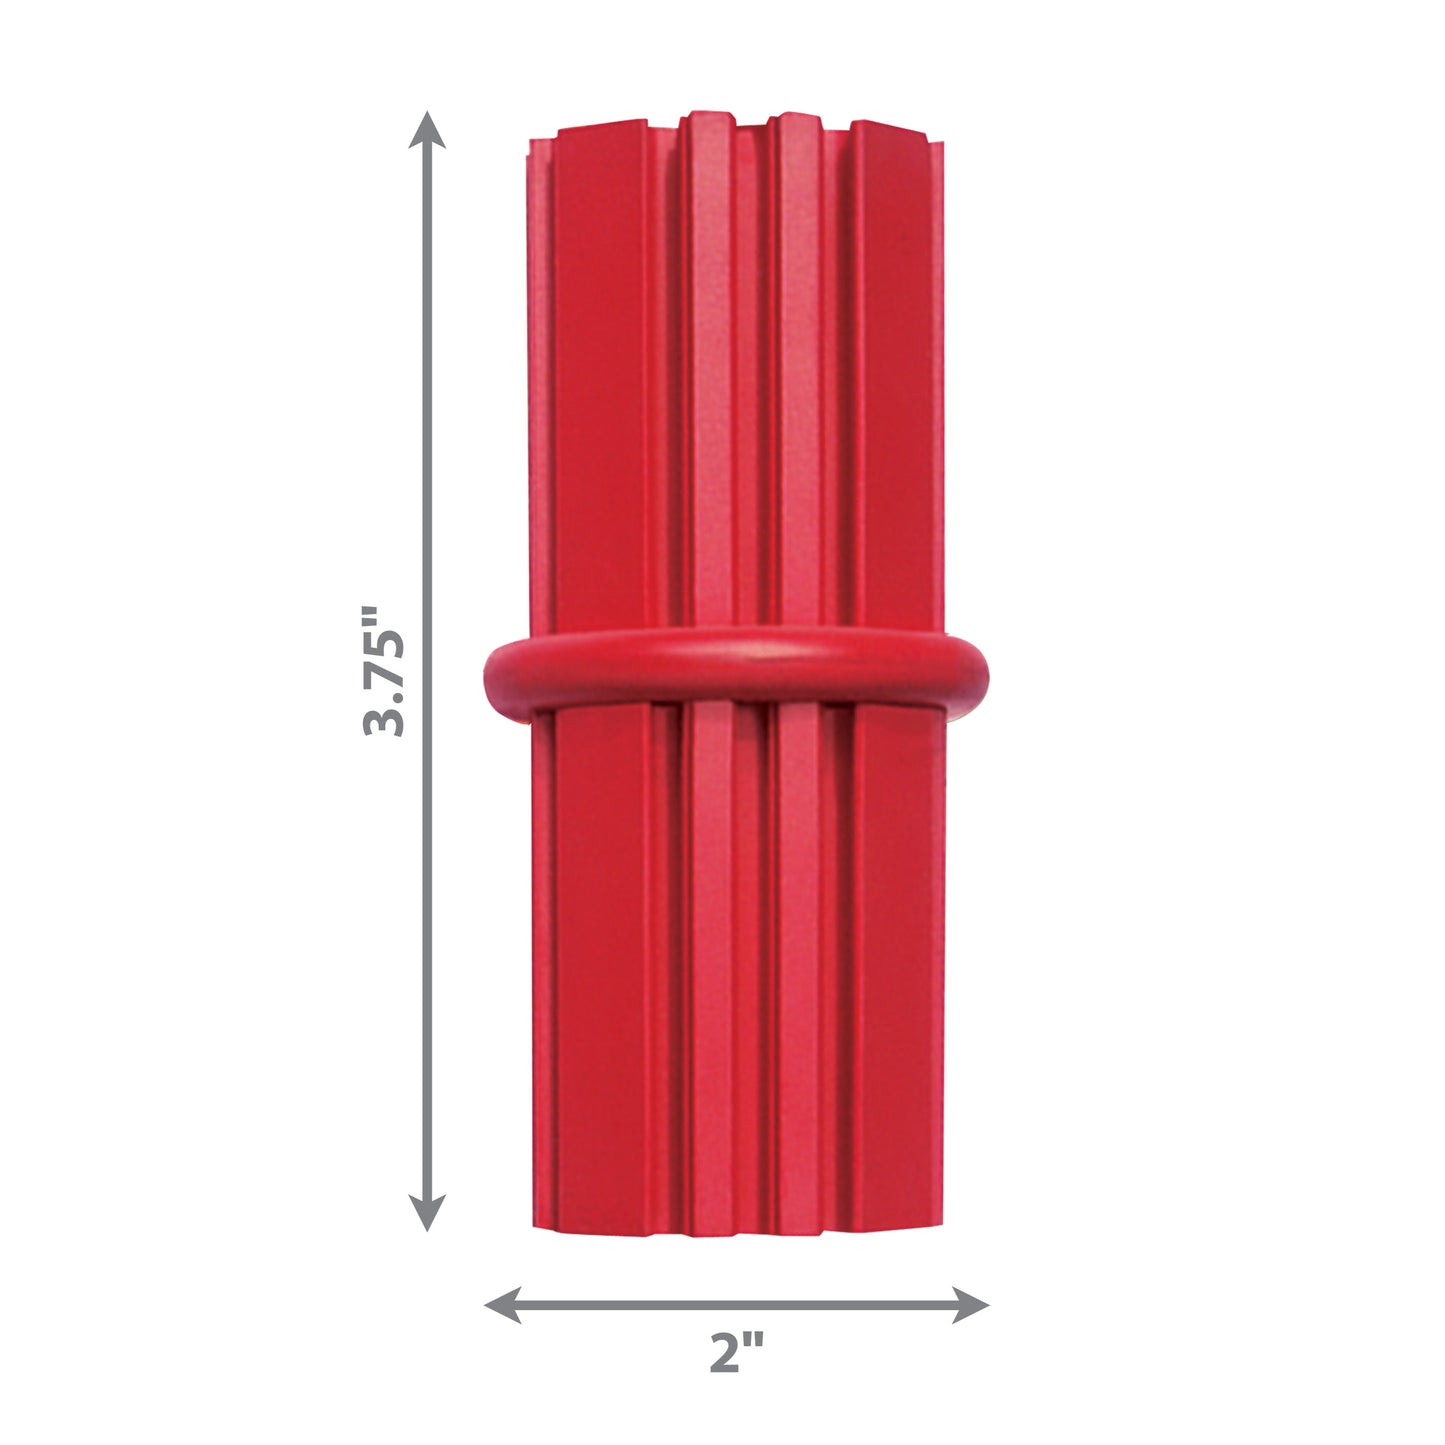 An image of the SALE: KONG Dental Stick by Your Whole Dog, a red plastic tube with measurements, designed for dental care for teeth and gums.